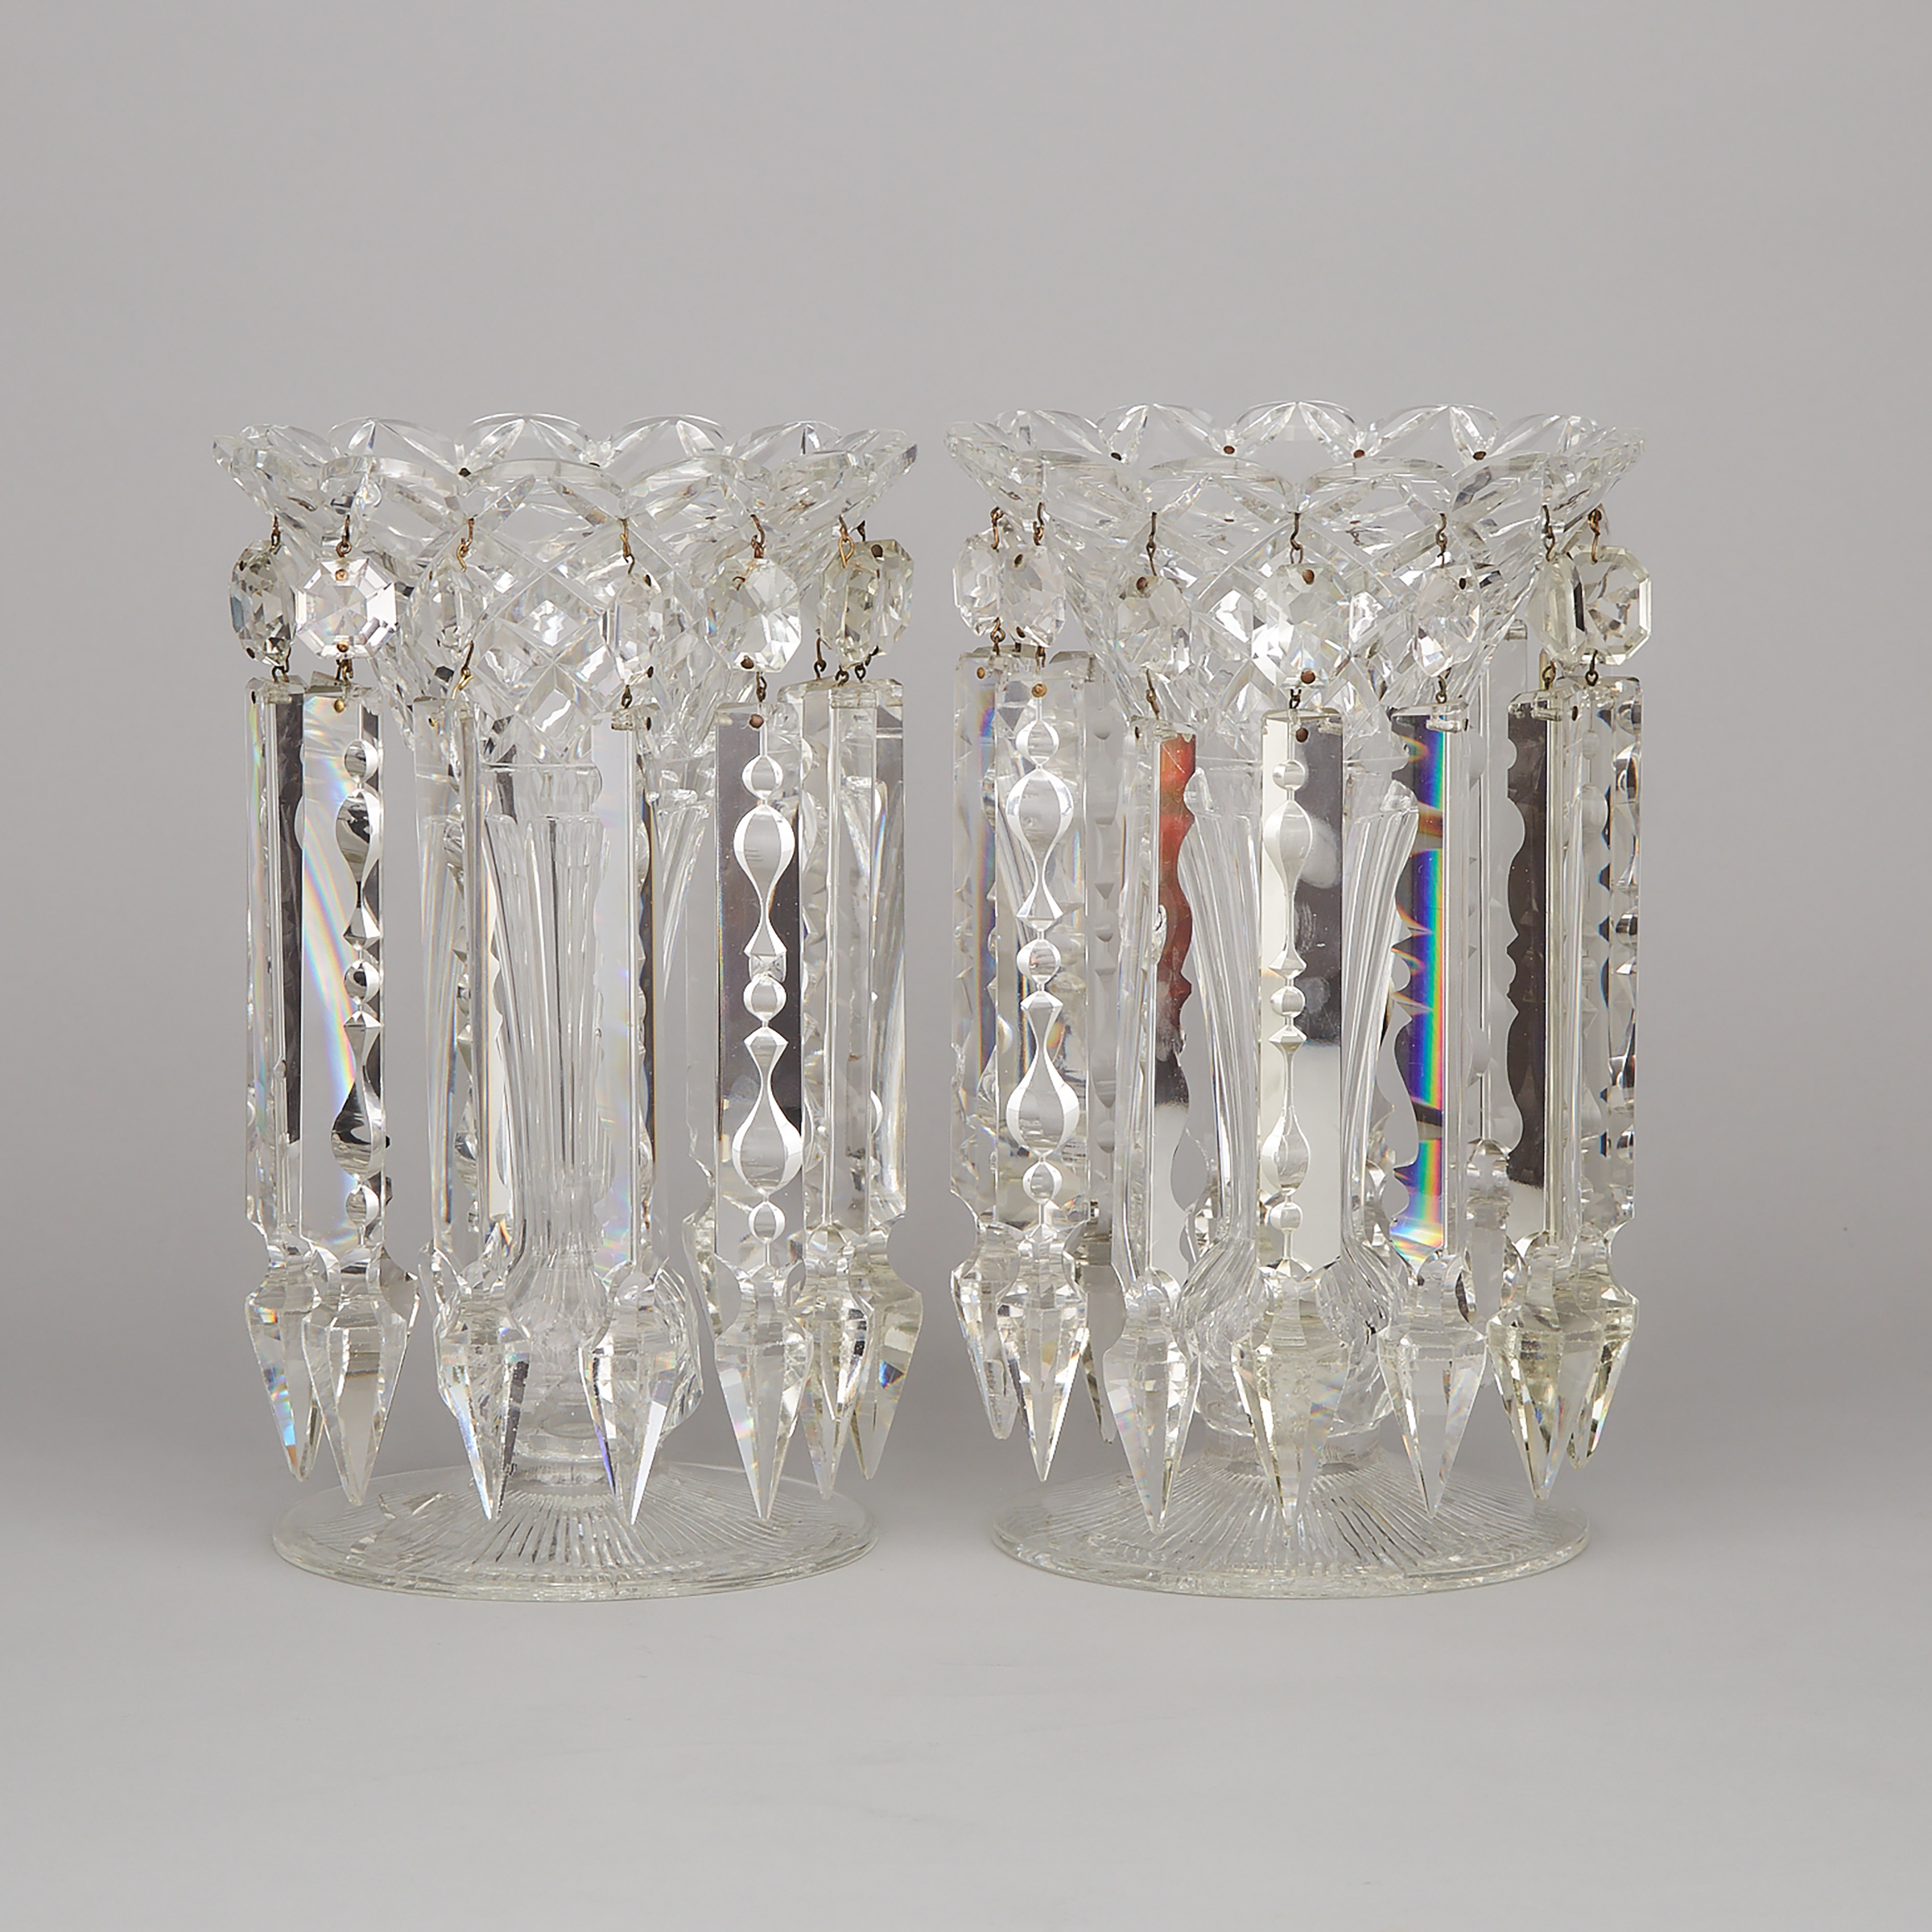 Pair of English Cut Glass Lustres, late 19th century